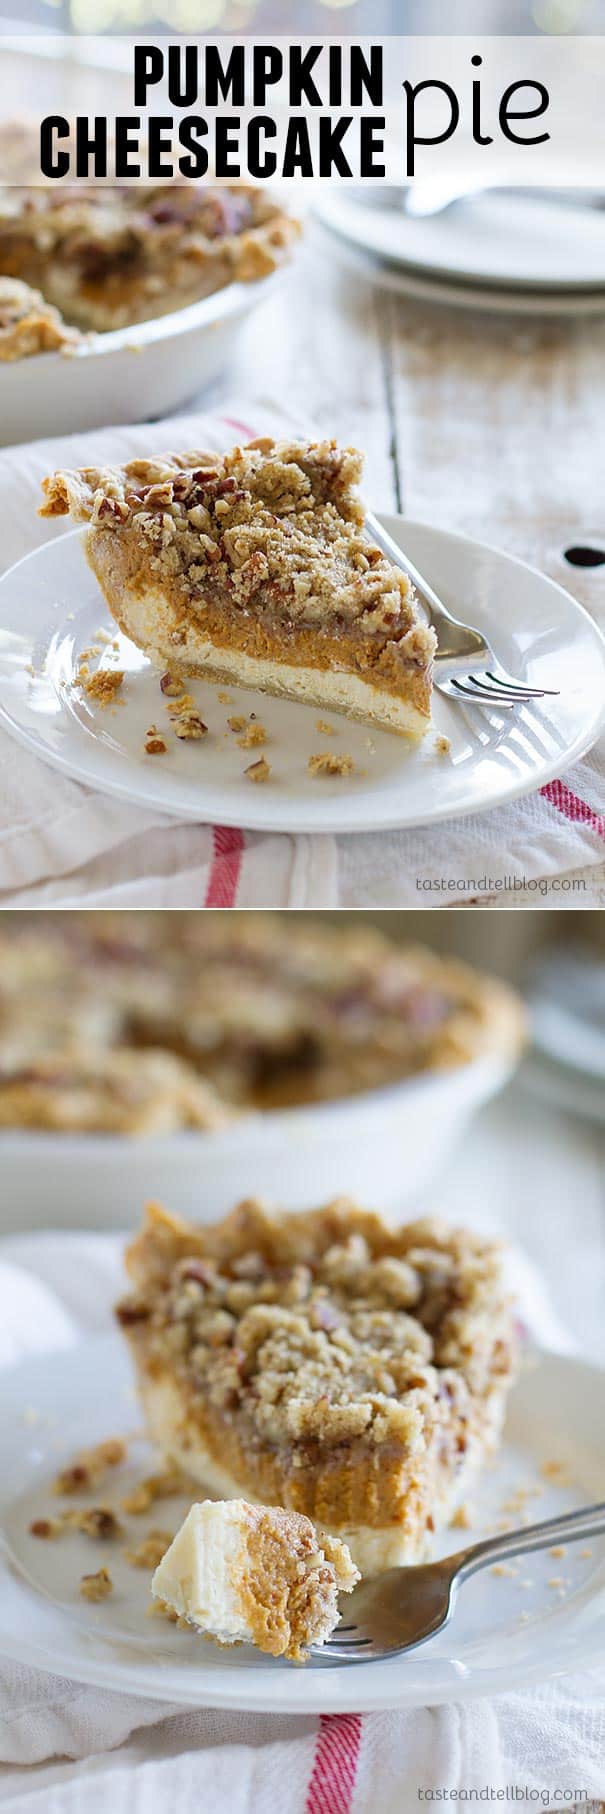 Cheesecake and pumpkin pie combined! A cheesecake layer is topped with a pumpkin pie layer and then a layer of streusel in this holiday worthy Pumpkin Cheesecake Pie.